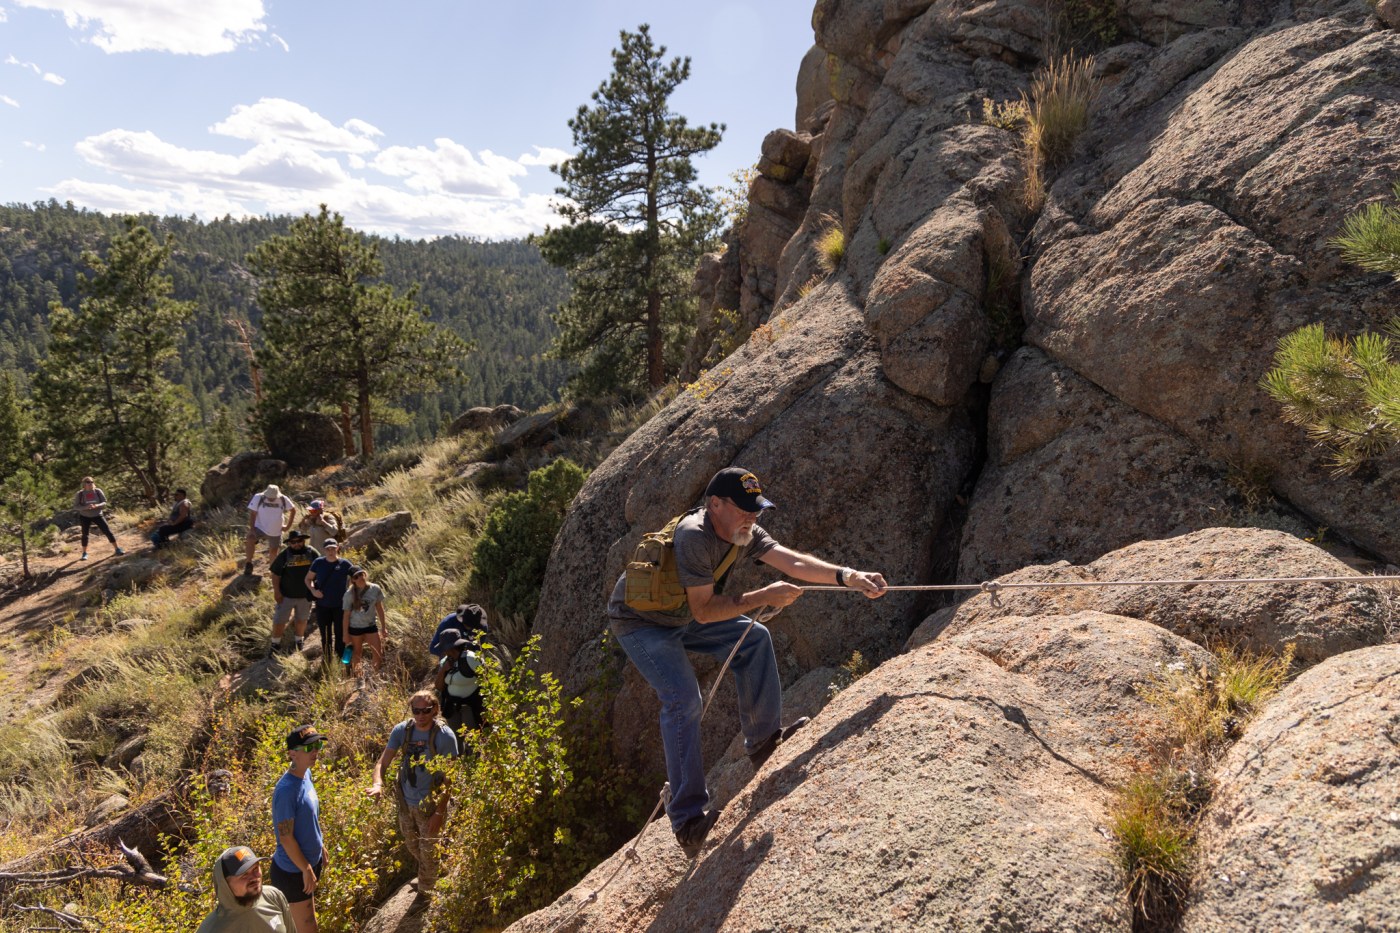 This year's programs for No Barriers Warriors include basecamp experiences in Colorado and backcountry expeditions in Wyoming, northern Colorado and western North Carolina.